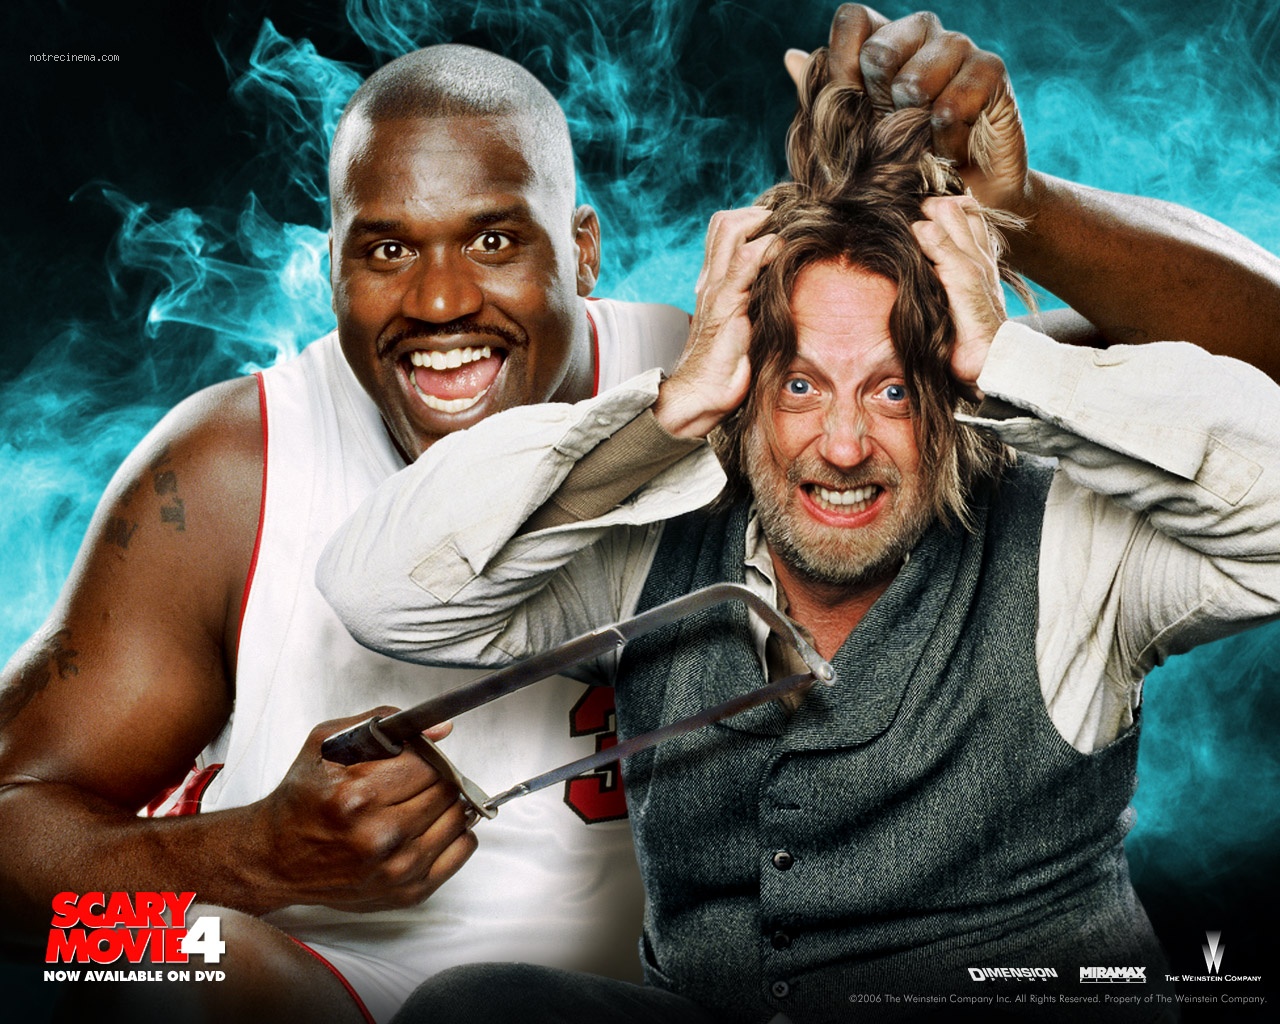 Scary Movie 4 Pics, Movie Collection - Pc Game - HD Wallpaper 